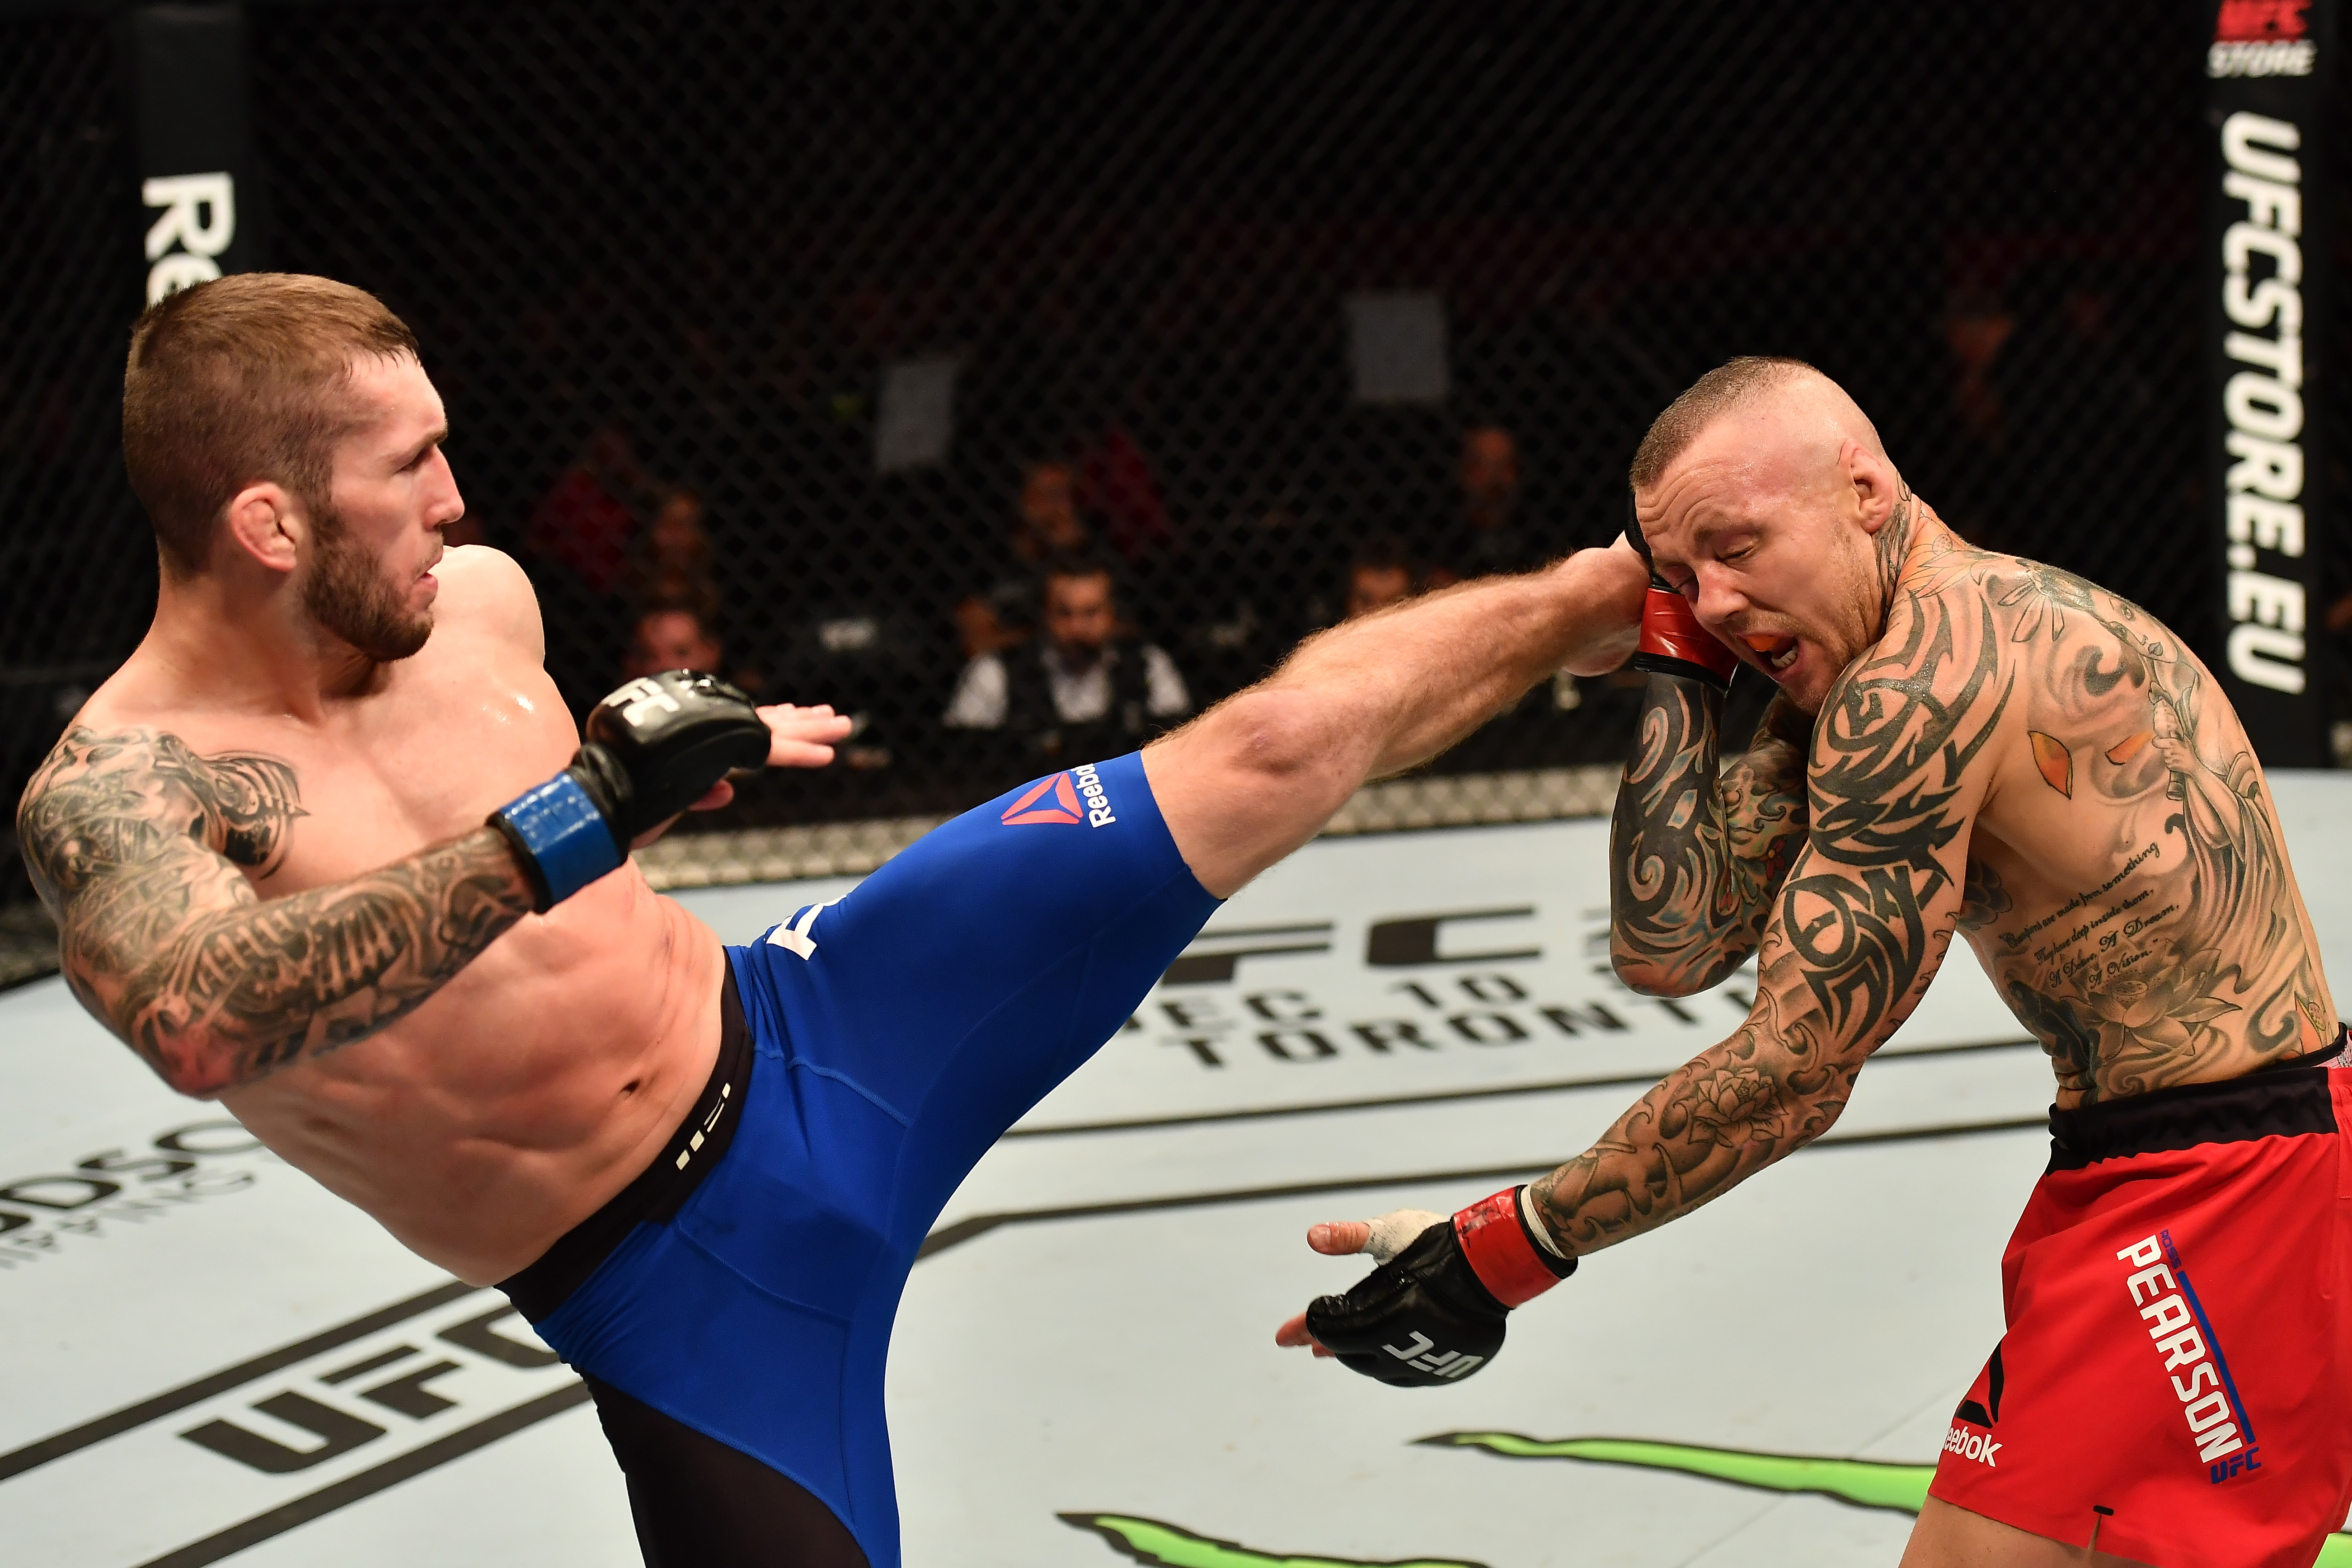 <a href='../fighter/stevie-ray'>Stevie Ray</a> of Scotland kicks <a href='../fighter/Ross-Pearson'>Ross Pearson</a> of England in their lightweight bout during the <a href='../event/UFC-Silva-vs-Irvin'>UFC Fight Night </a>at the SSE Arena on November 19, 2016 in Belfast, Northern Ireland. (Photo by Brandon Magnus/Zuffa LLC)“ align=“center“/> Where exactly did things take a wrong turn for Stevie Ray? It hasn’t been long, a little more than a year to be precise, since the Scottish bomber was one of the hottest fighters in the UFC’s notoriously crowded lightweight division.<p>Then, a single violent outburst courtesy of <a href=